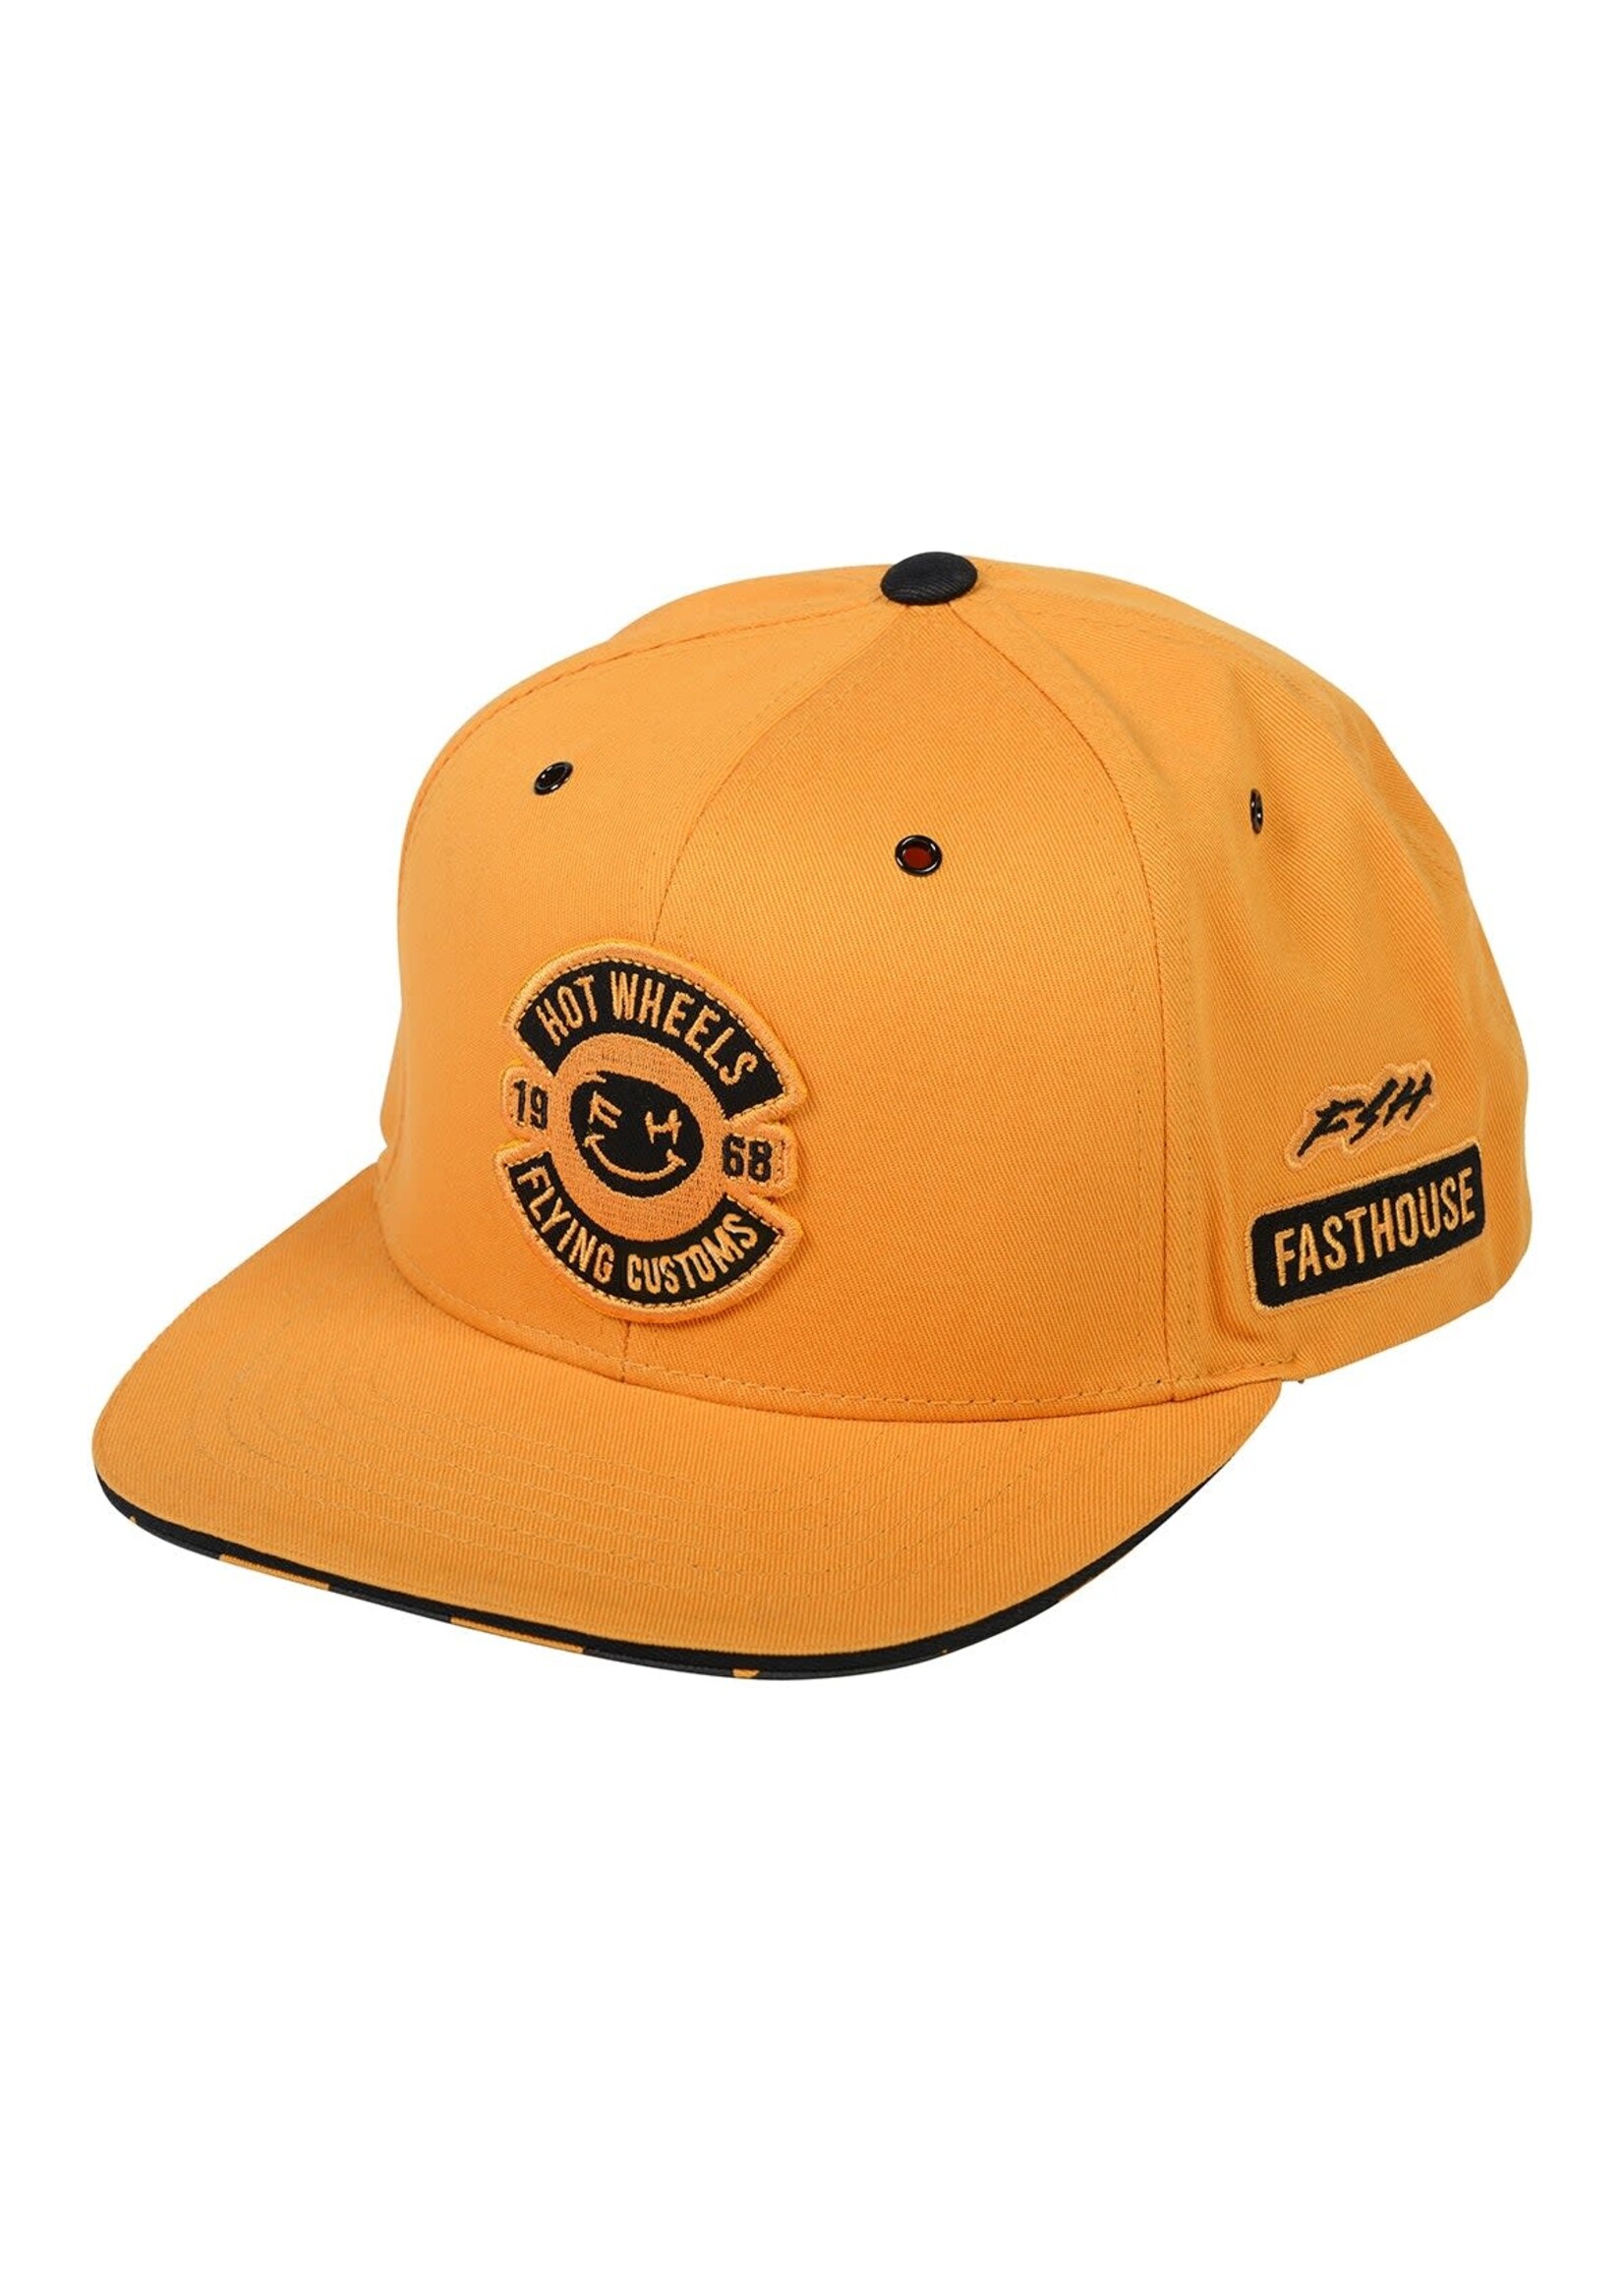 FASTHOUSE Dash Wheels Hat [Vintage Gold] [OS]